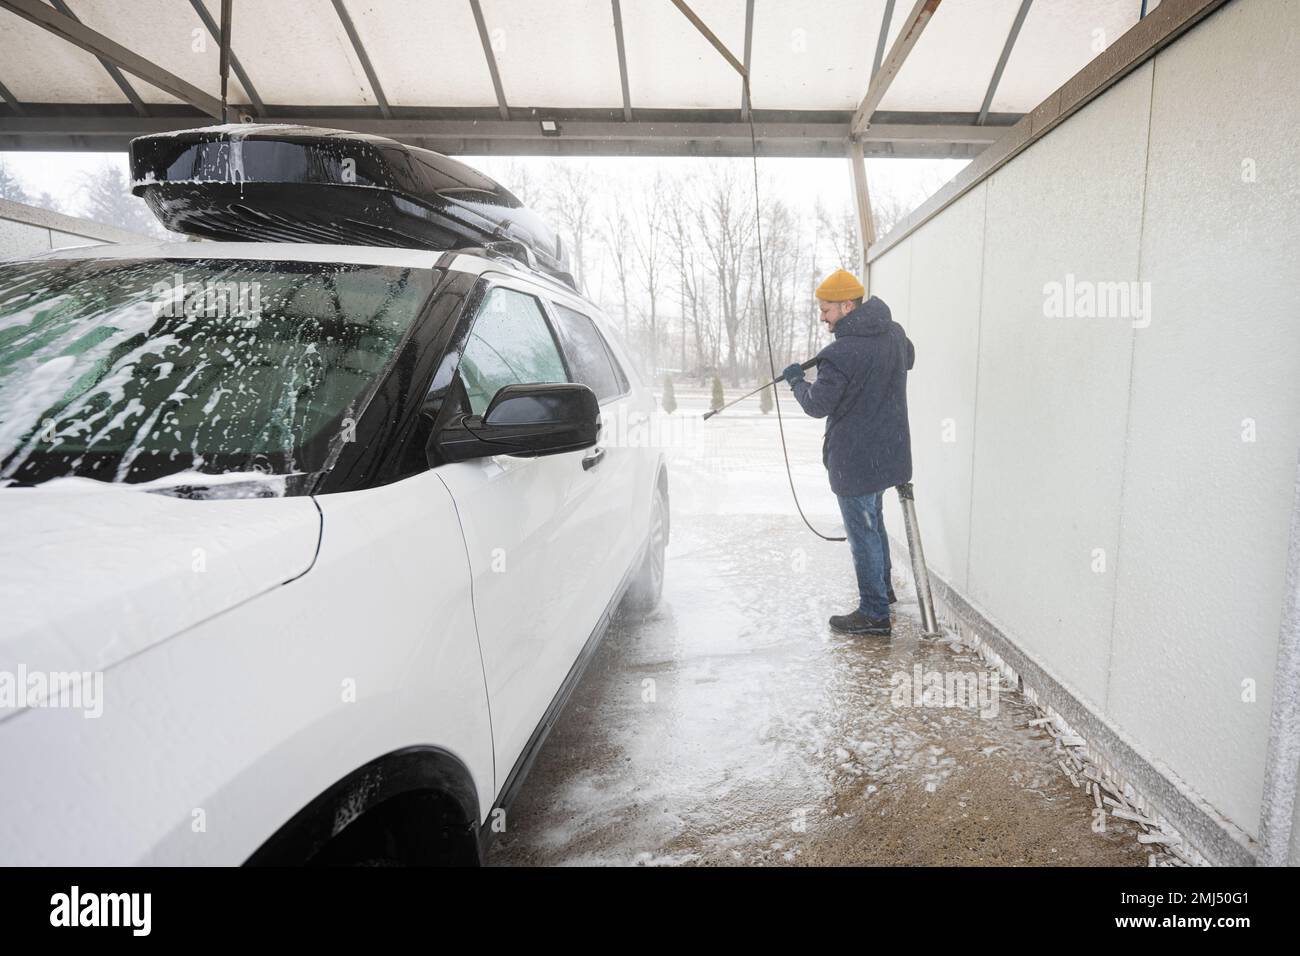 A man holds a foam sprayer from which foam flies out onto a car. A car at a  self service car wash. Stock Photo by romanchoknadii